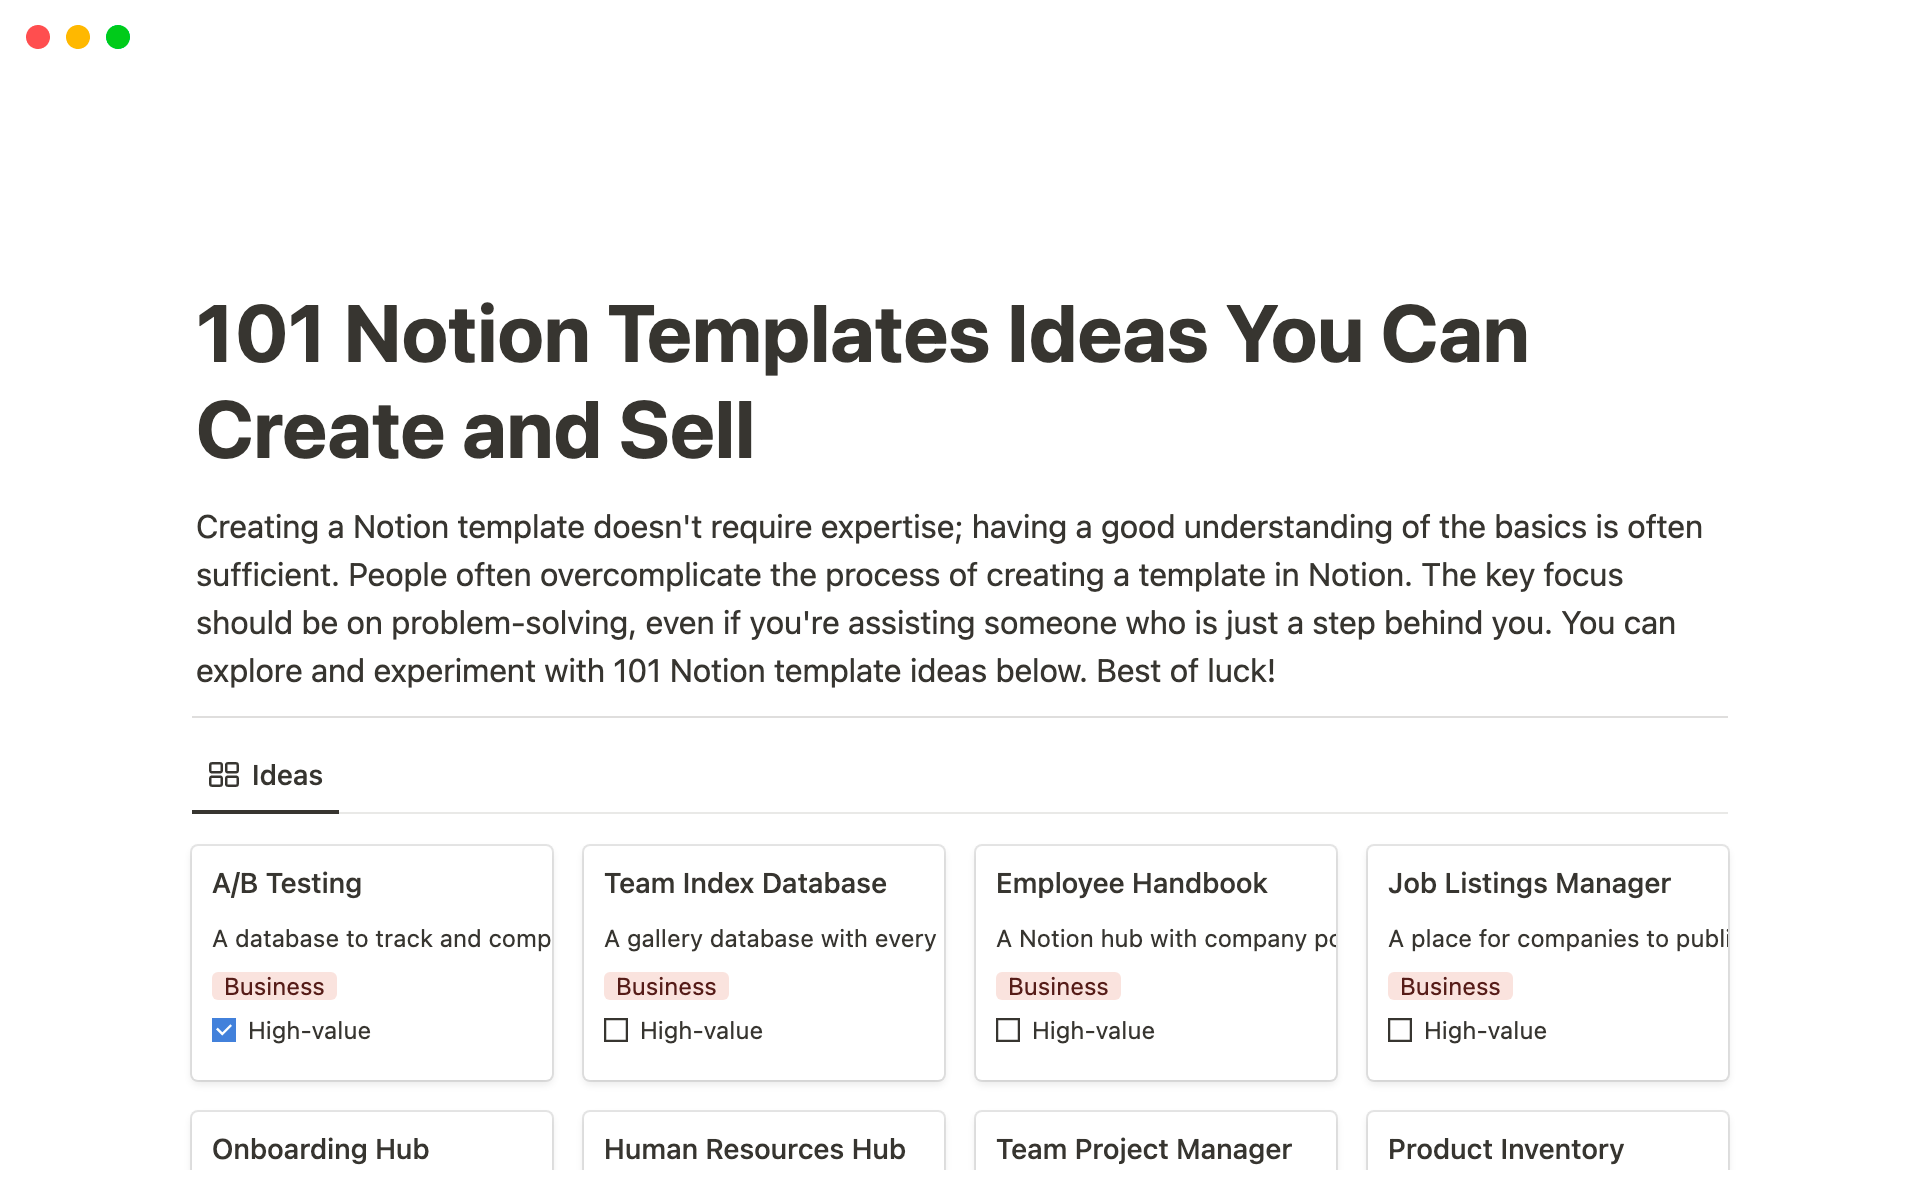 Make $2,000+/month with these easy 101 Notion template ideas